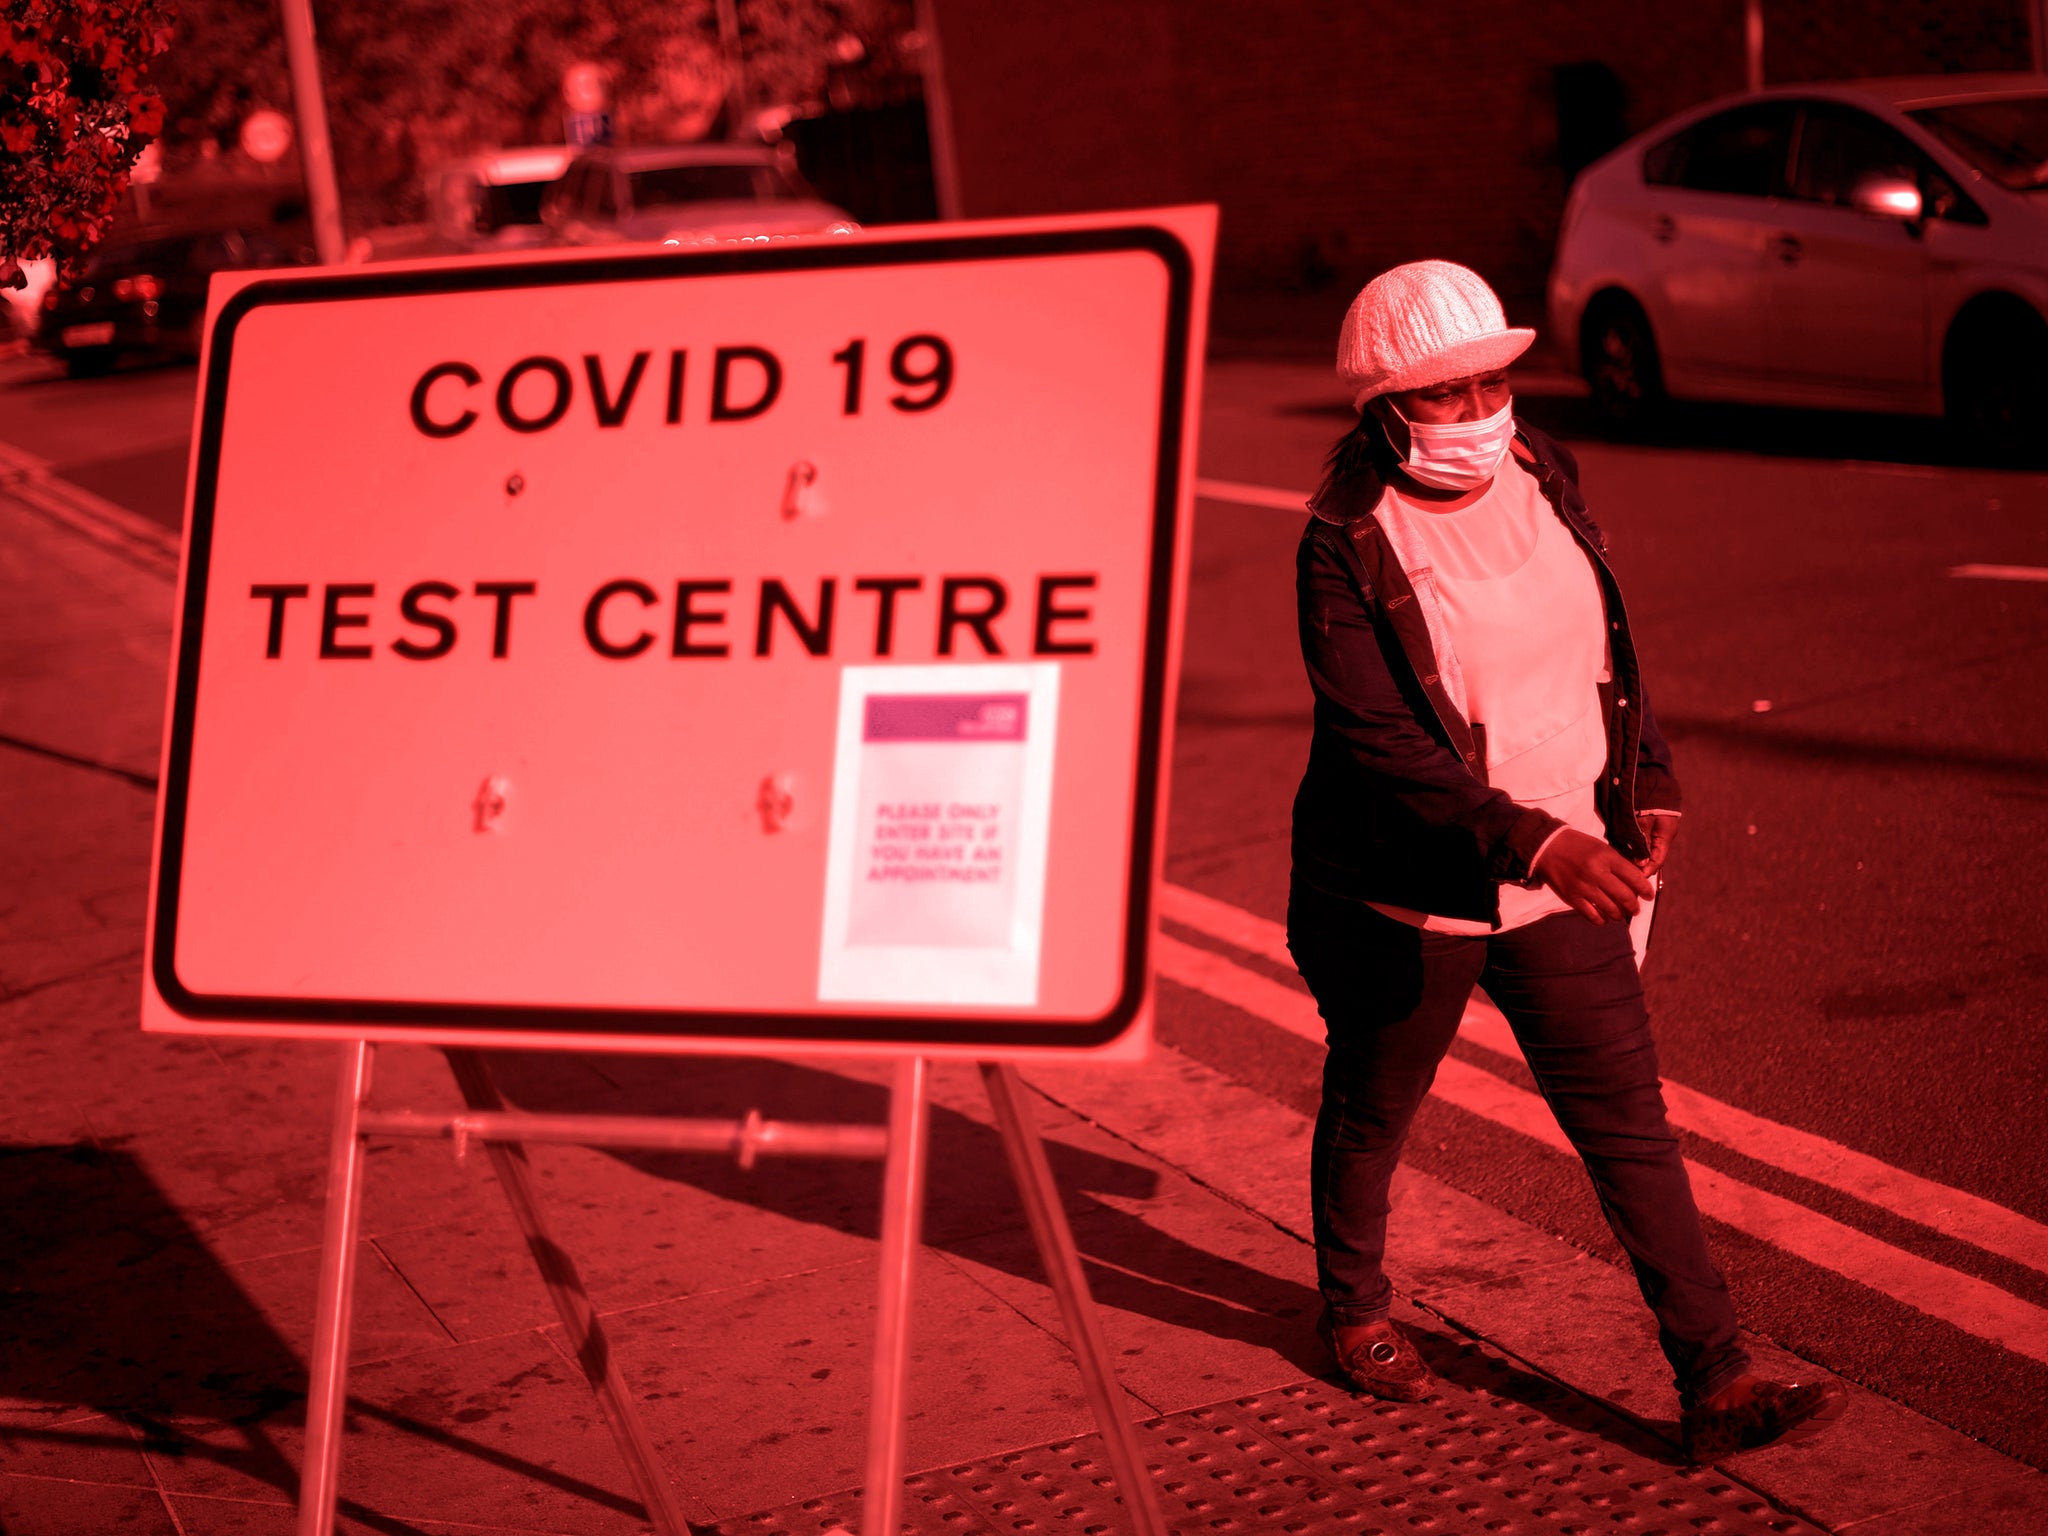 Pedestrian wearing facemask walks past a sign for a Covid-19 test centre in Leyton, east London on 19 September